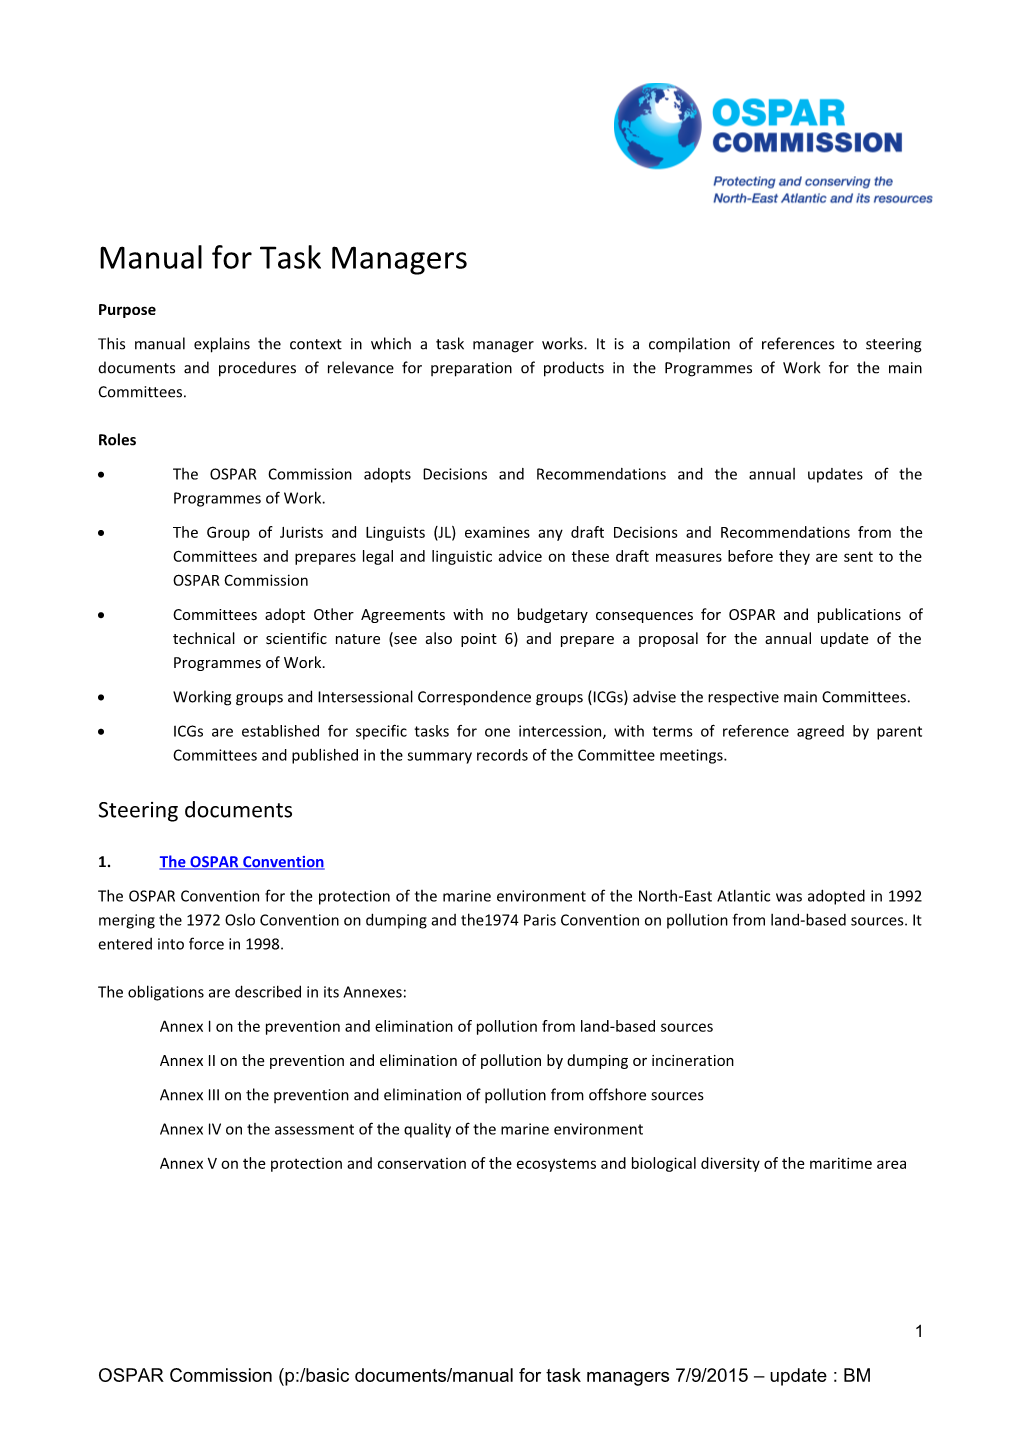 The OSPAR Manual for Task Managers Should Use the Same Approach As the Inhouse Manual;